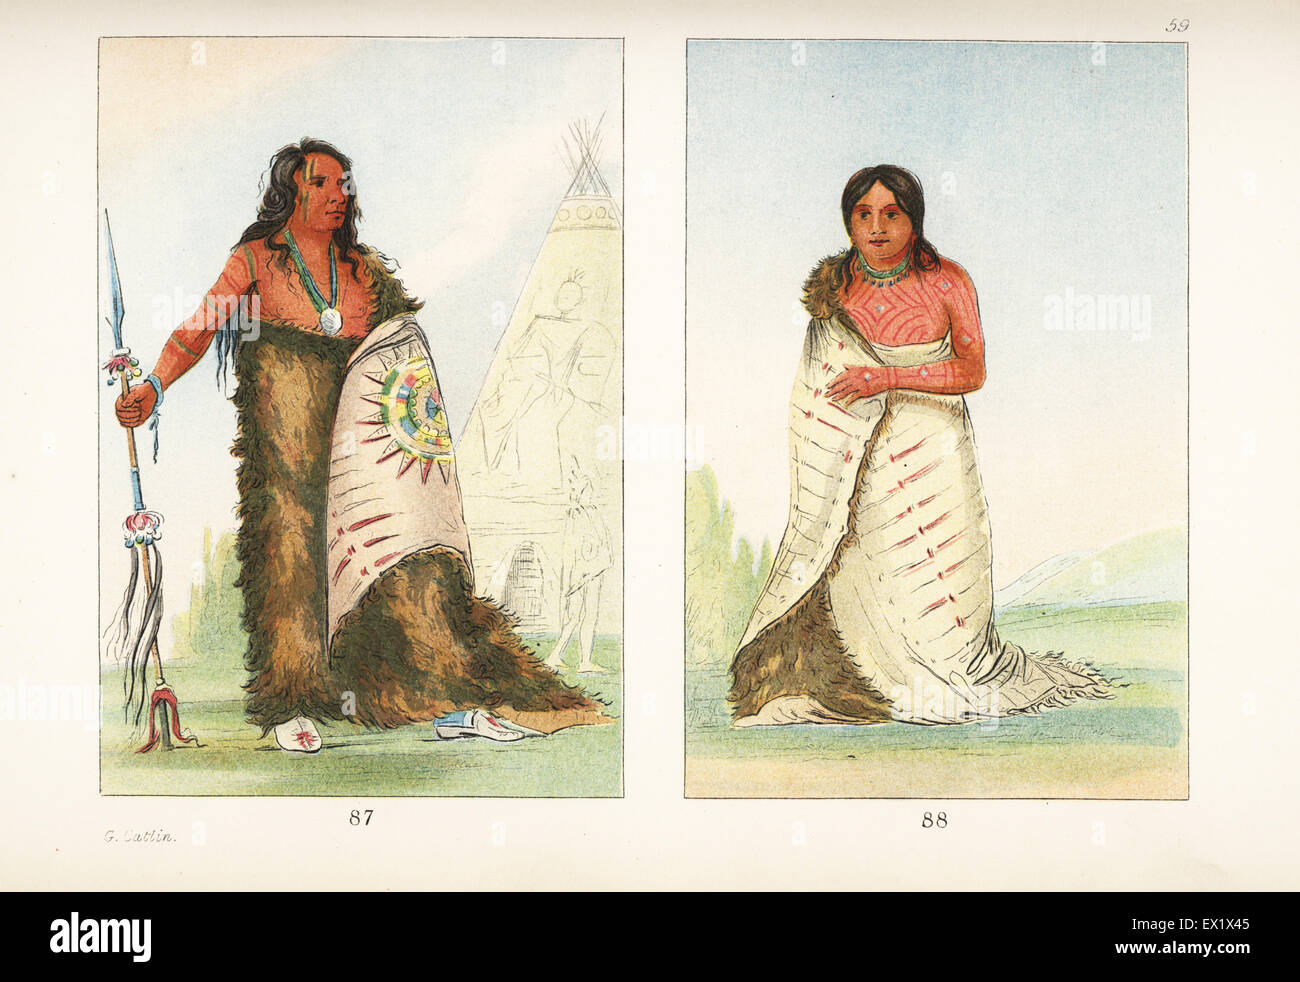 Sioux chief Shoo-de-ga-cha, Smoke, in buffalo robe outside a teepee 87 and his wife or squaw Hee-la'h-dee, Pure Fountain 88. Her arms and neck are tattooed by pricking with gunpowder and vermilion. Handcoloured lithograph from George Catlin's Manners, Customs and Condition of the North American Indians, London, 1841. Stock Photo